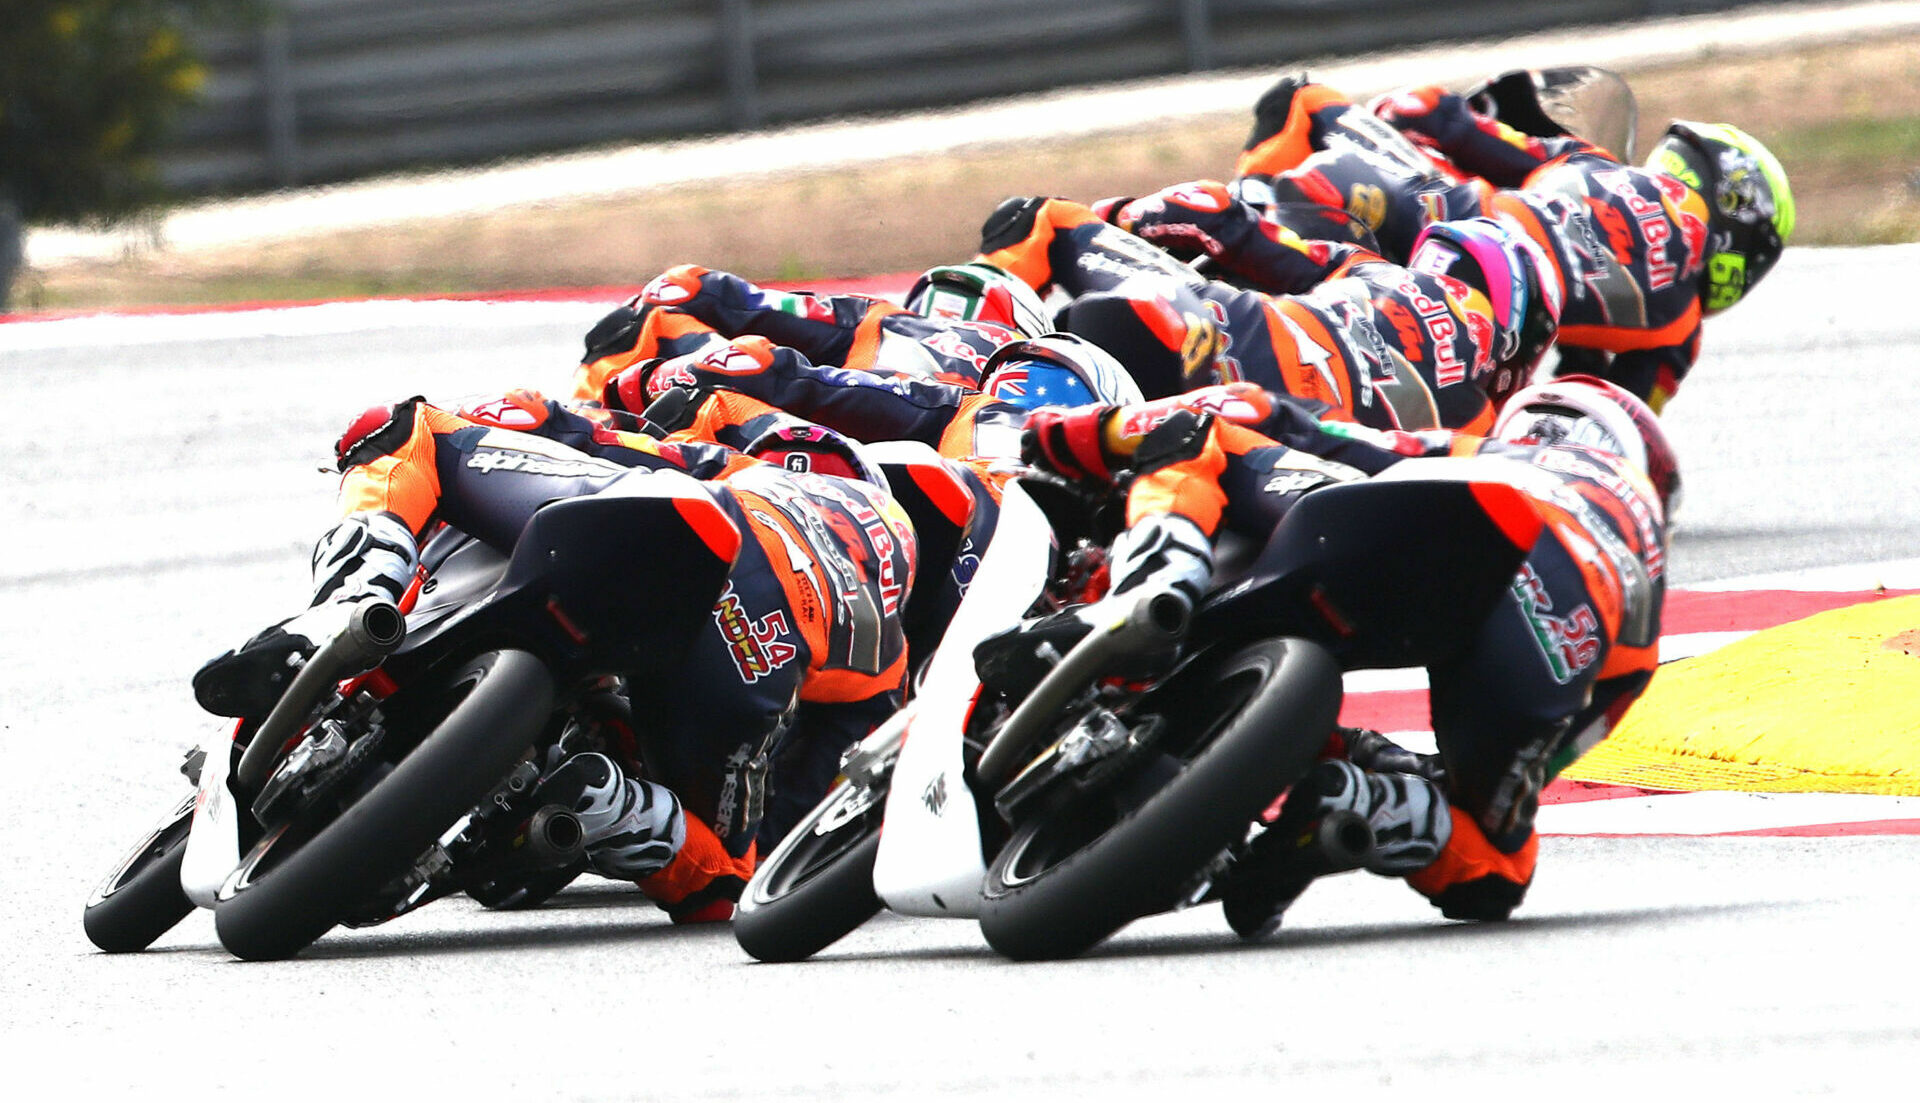 Red Bull MotoGP Rookies Cup participants testing at Algarve International Circuit, in Portugal. Photo courtesy Red Bull.